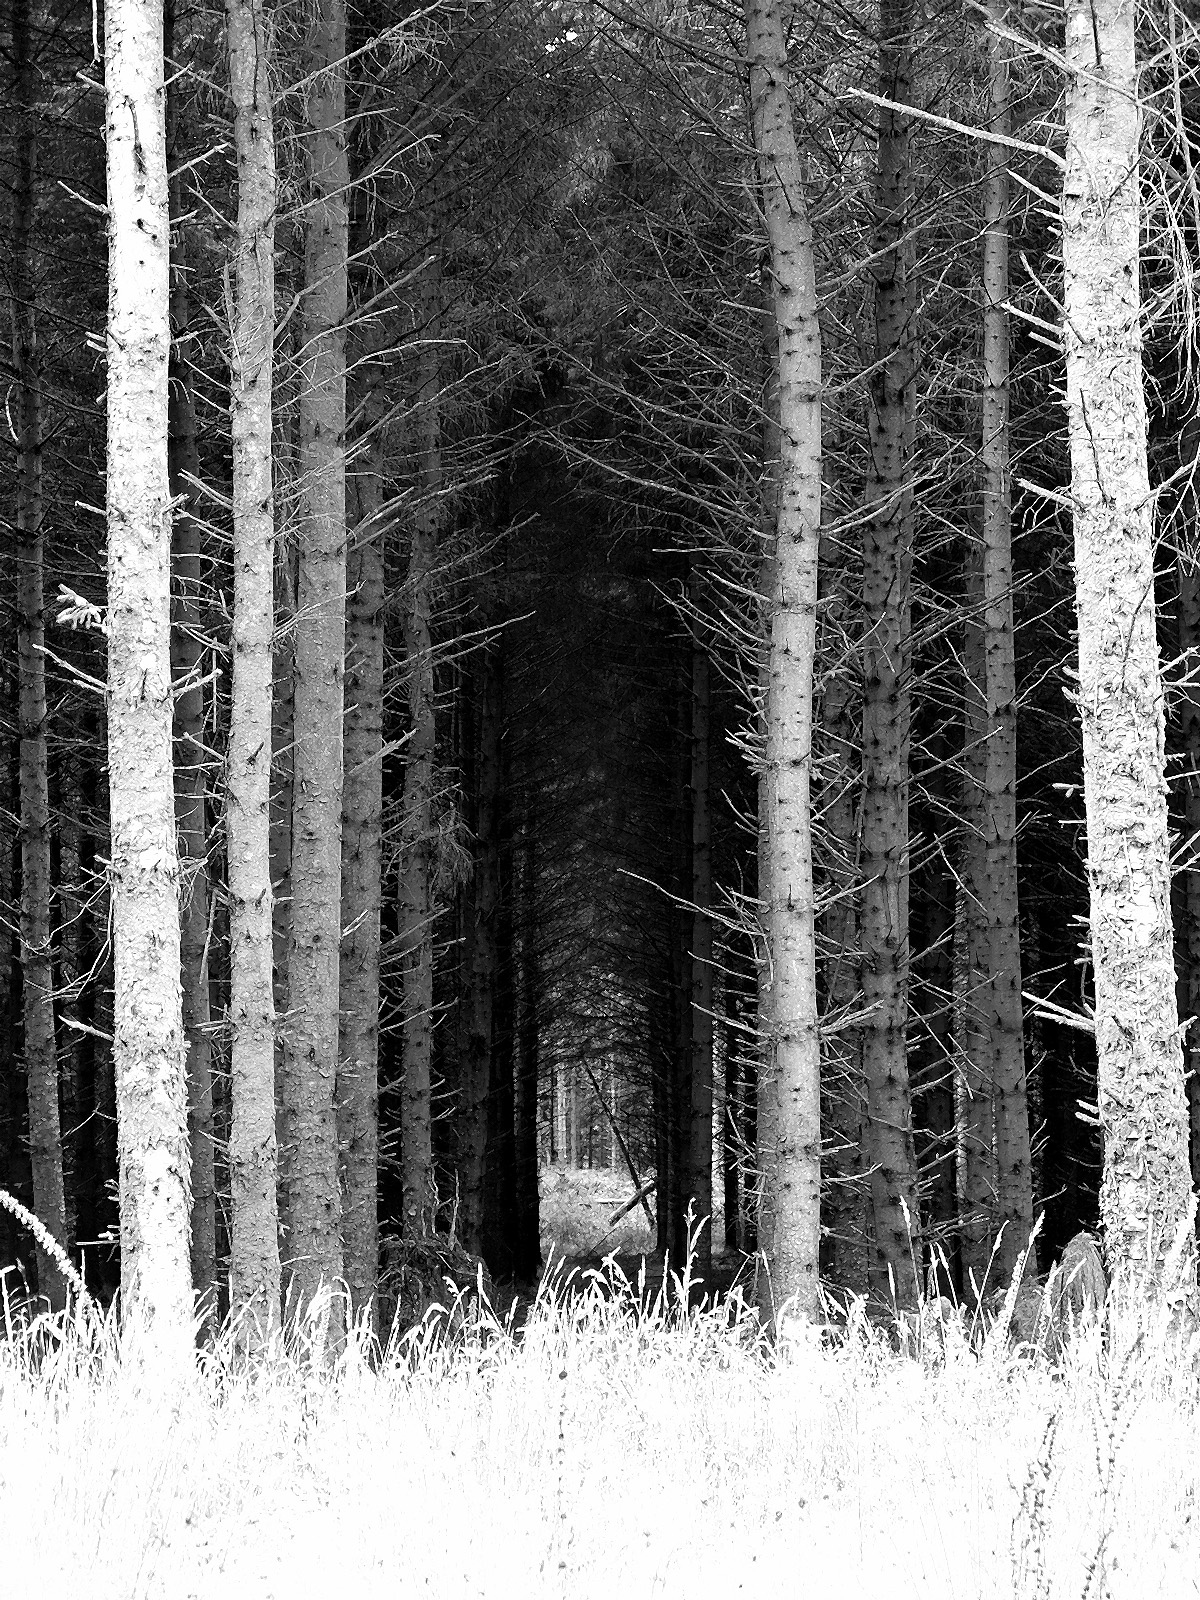 Collection of Spooky Forest Wallpaper (image in Collection)